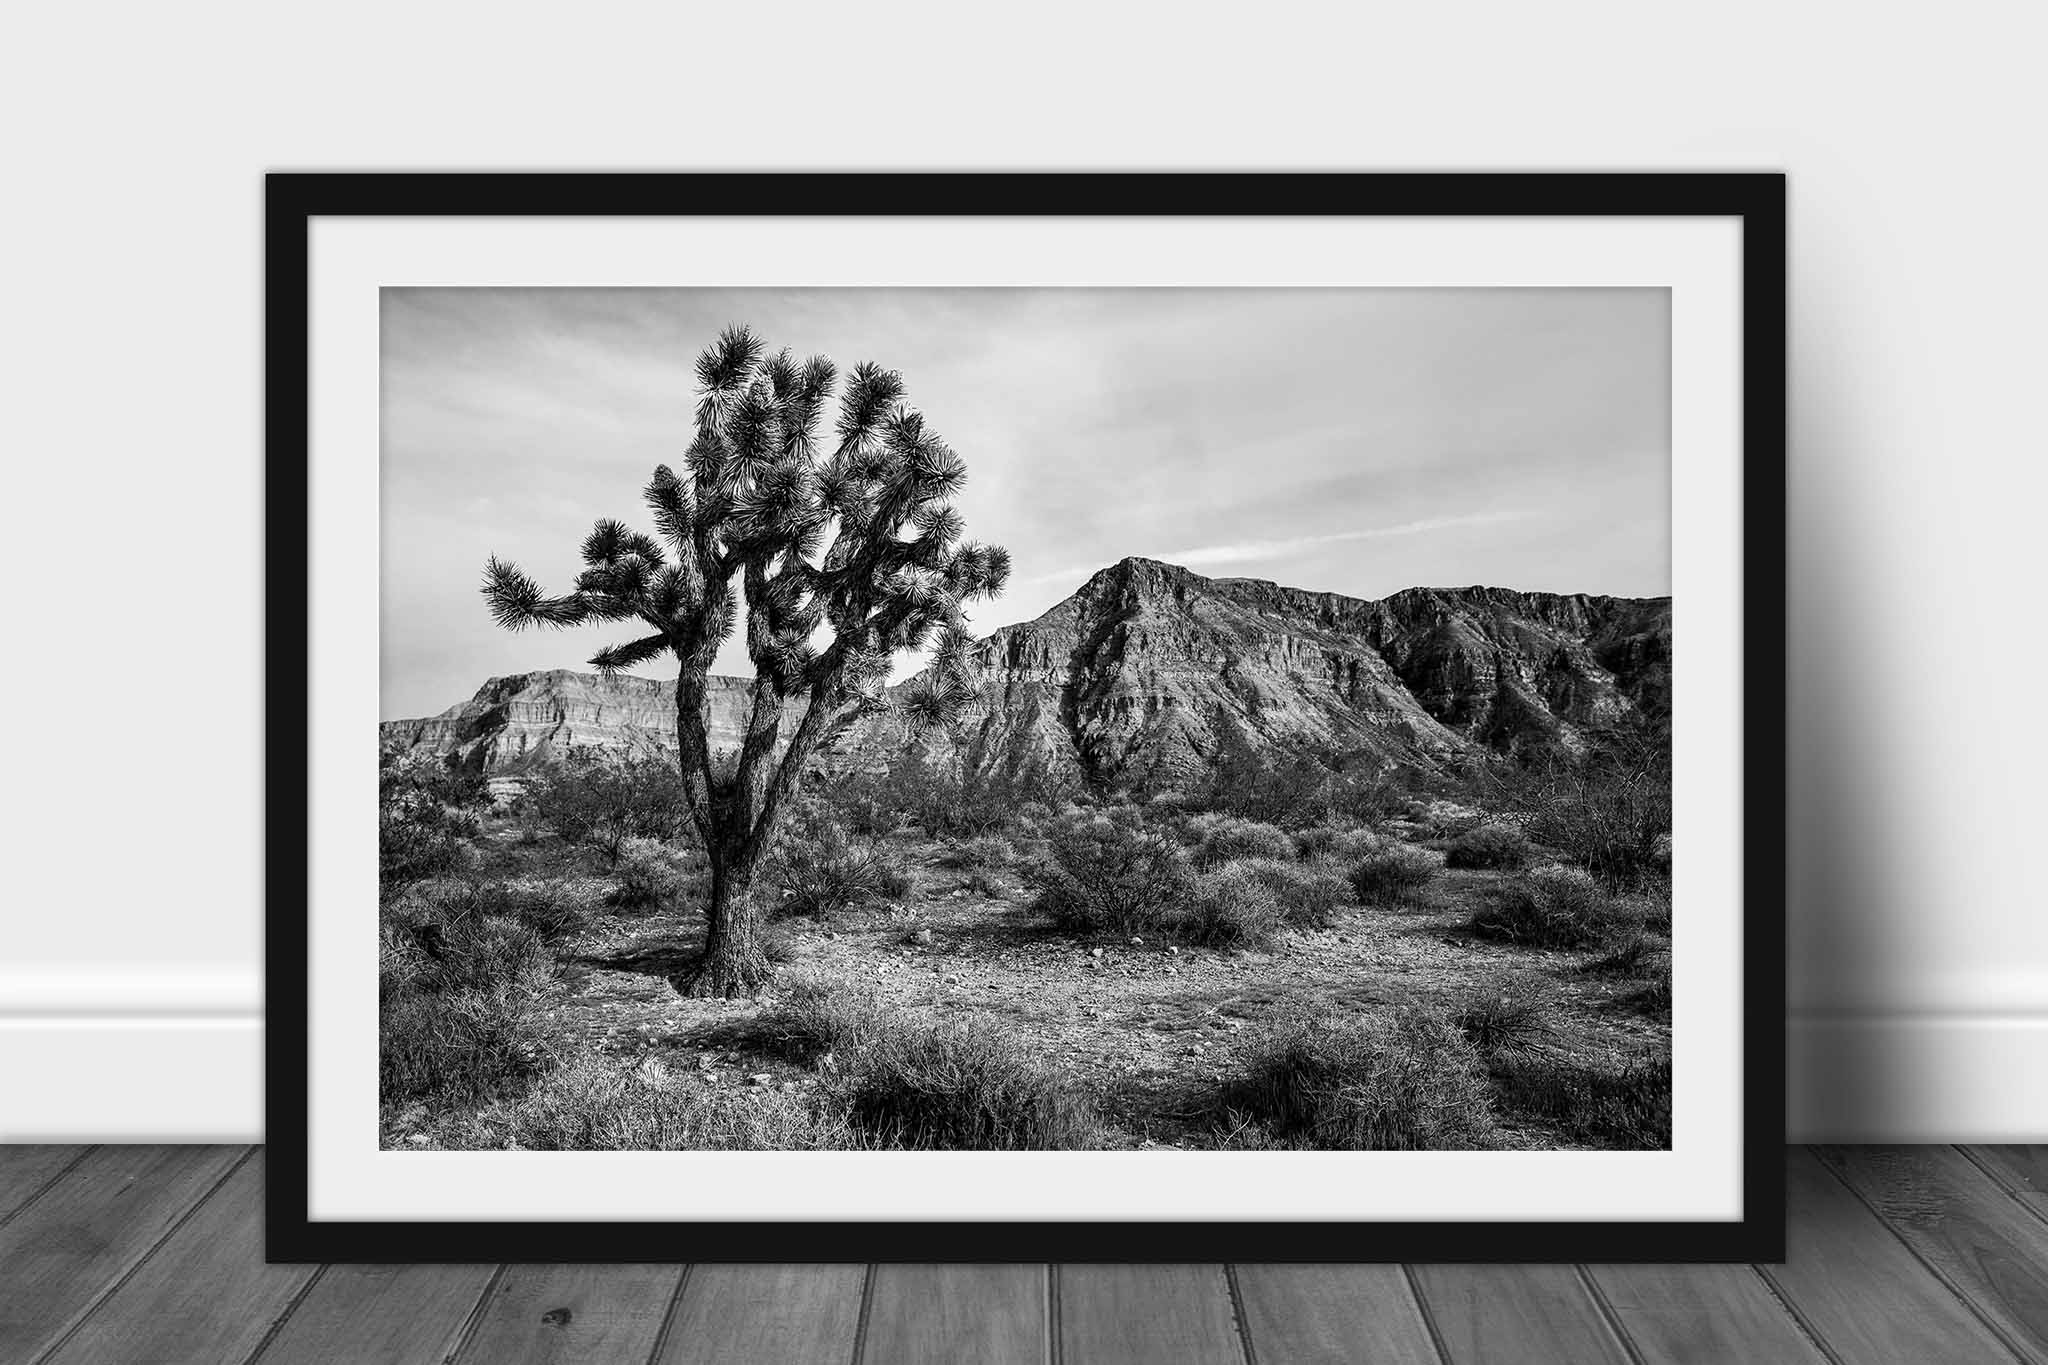 Framed and matted black and white photography print of a Joshua Tree and mountain in the Arizona desert by Sean Ramsey of Southern Plains Photography.